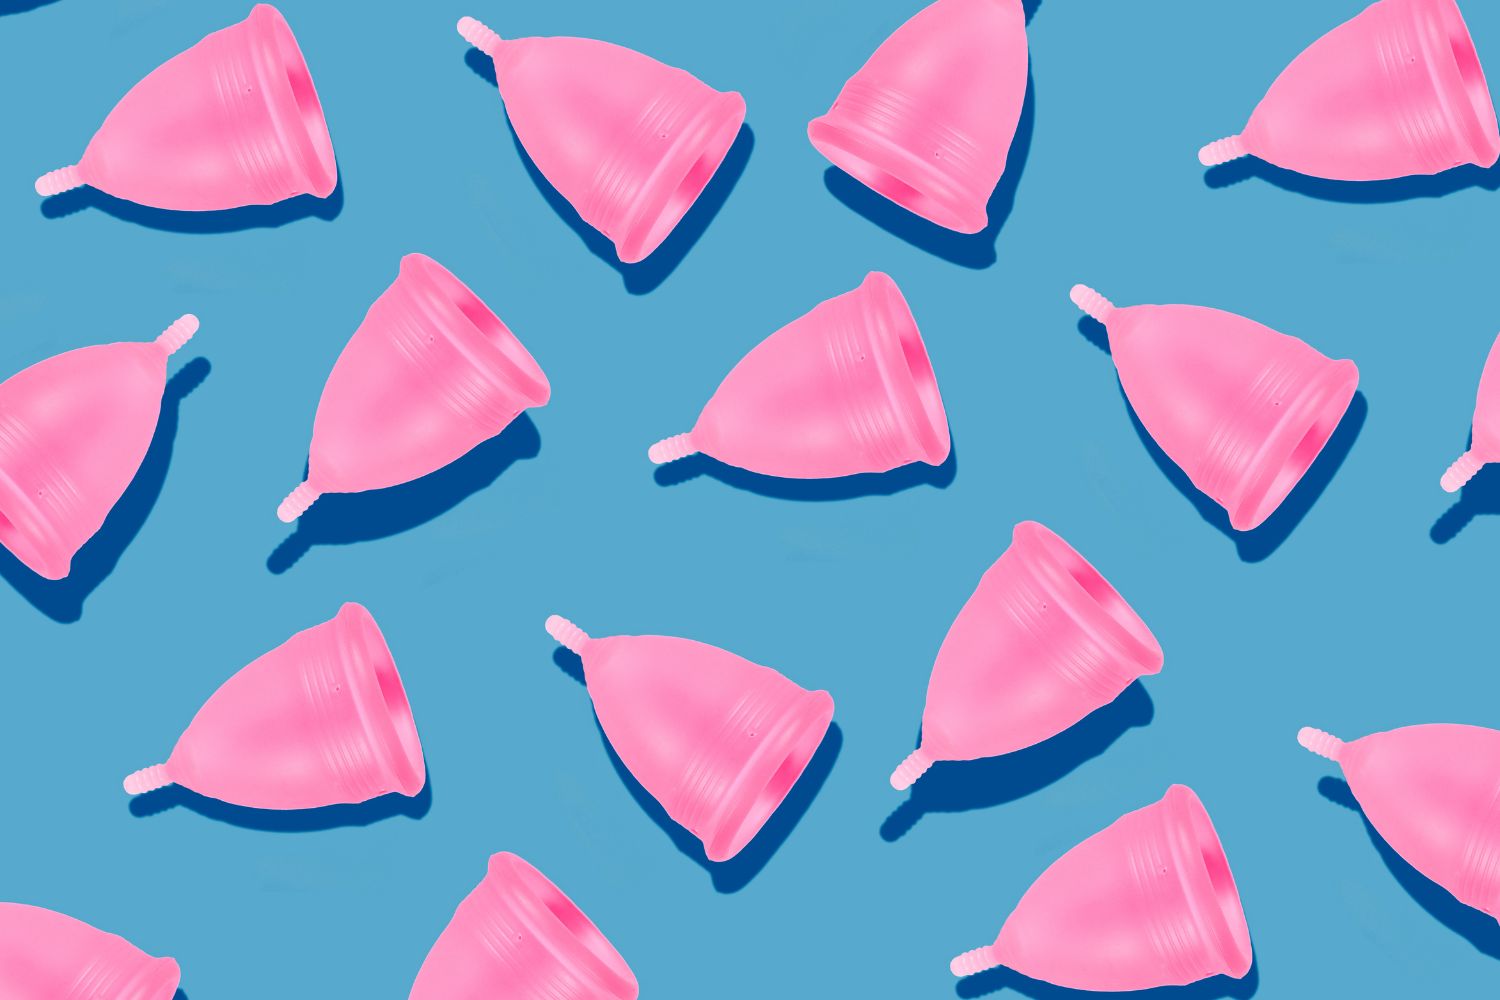 98% Of Women Experience Pain During Their Periods. Why Do We Still Try To Do It All?